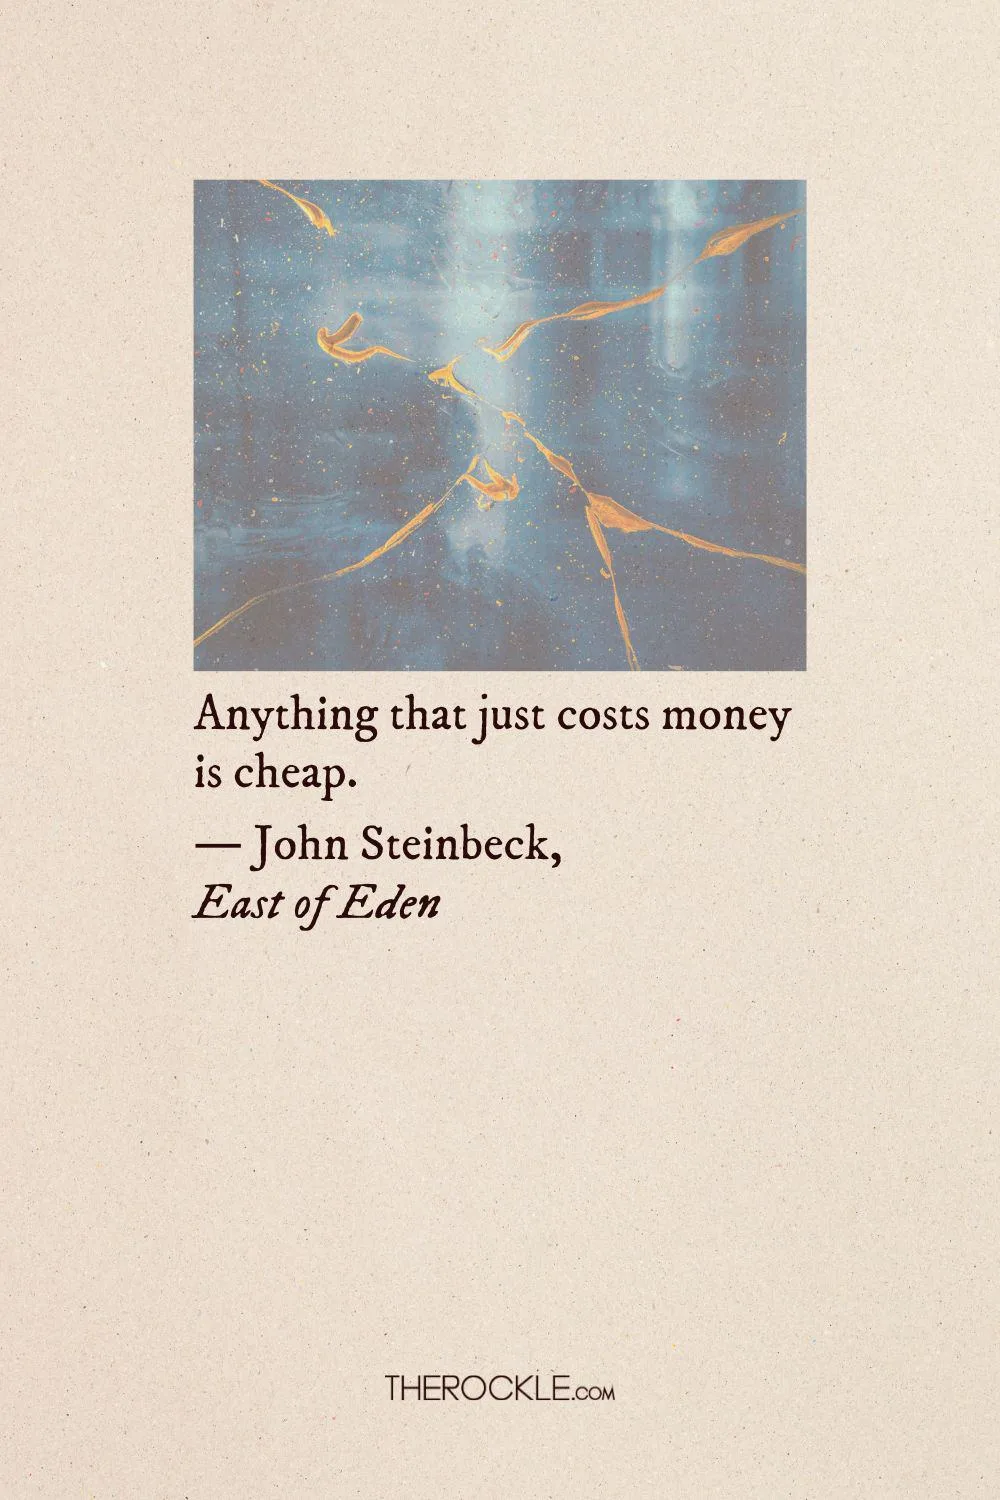 Steinbeck on value over cost